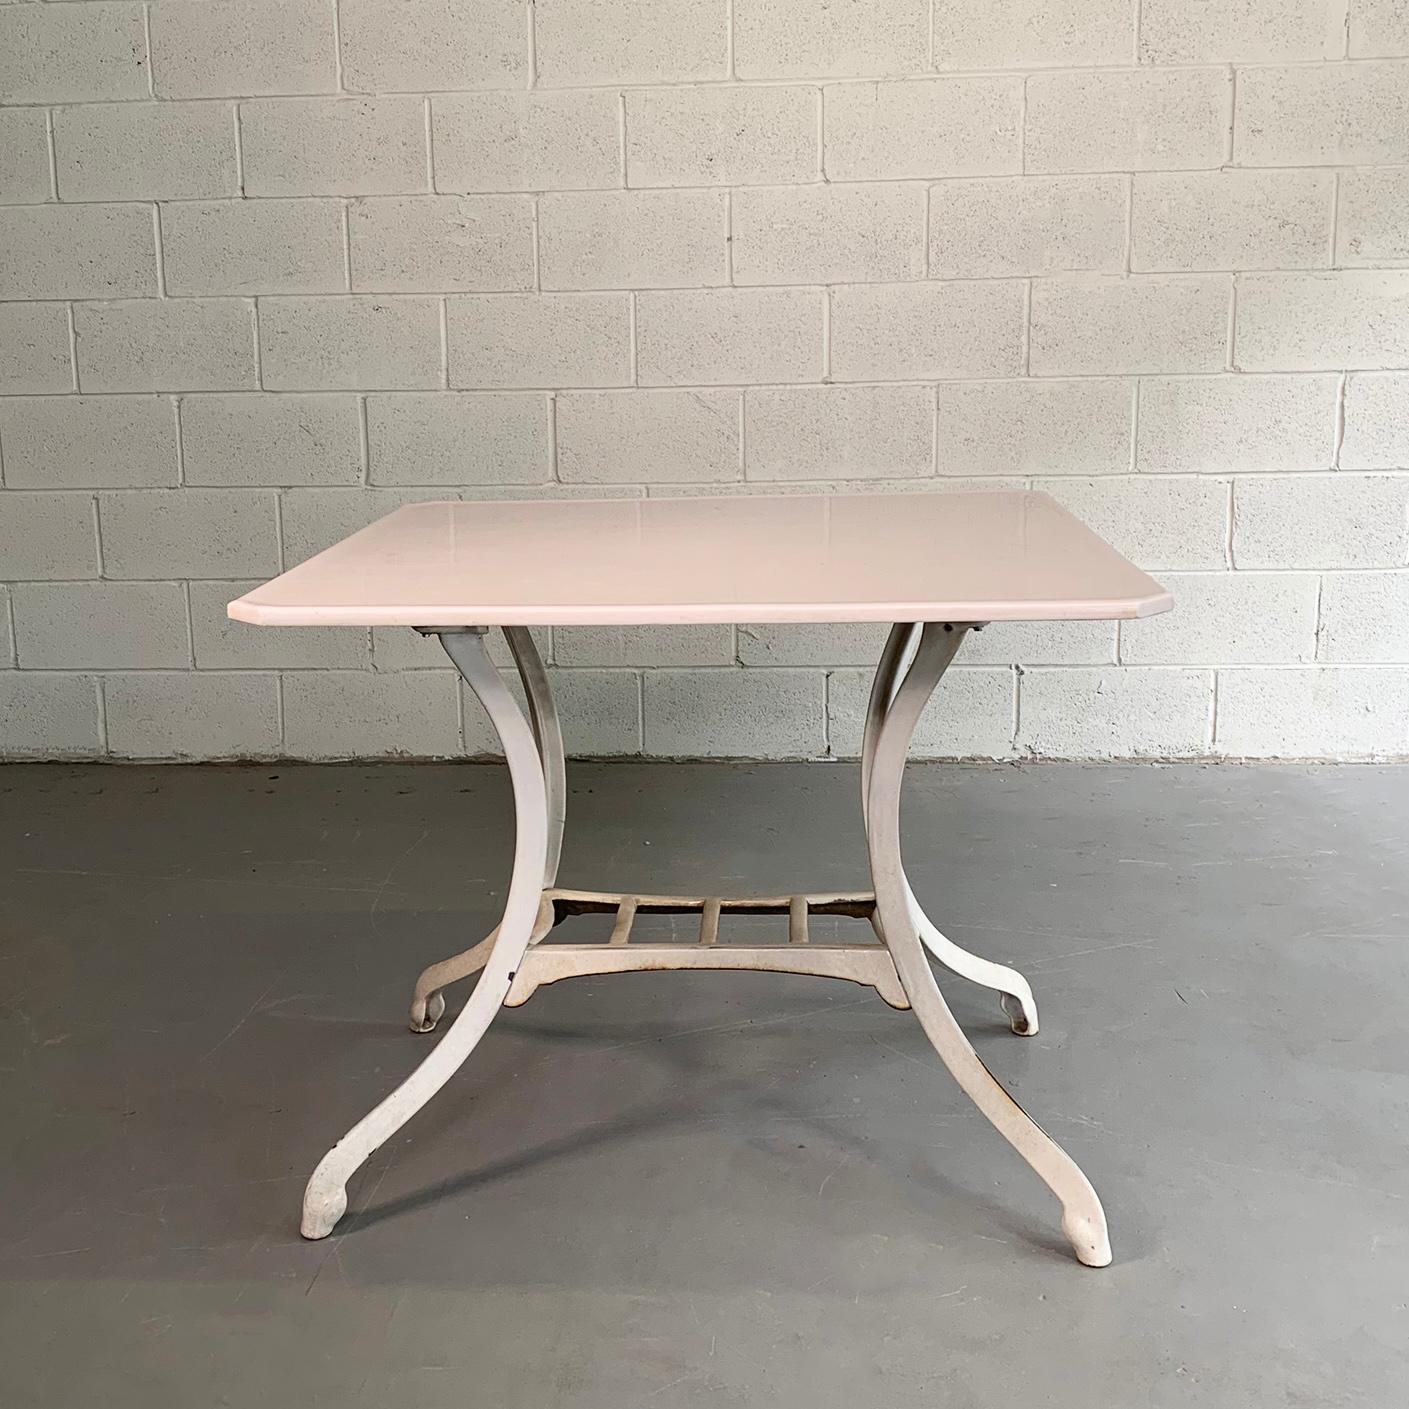 Industrial, early 20th century table features an enameled, cast iron base with milk white, Vitrolite top.